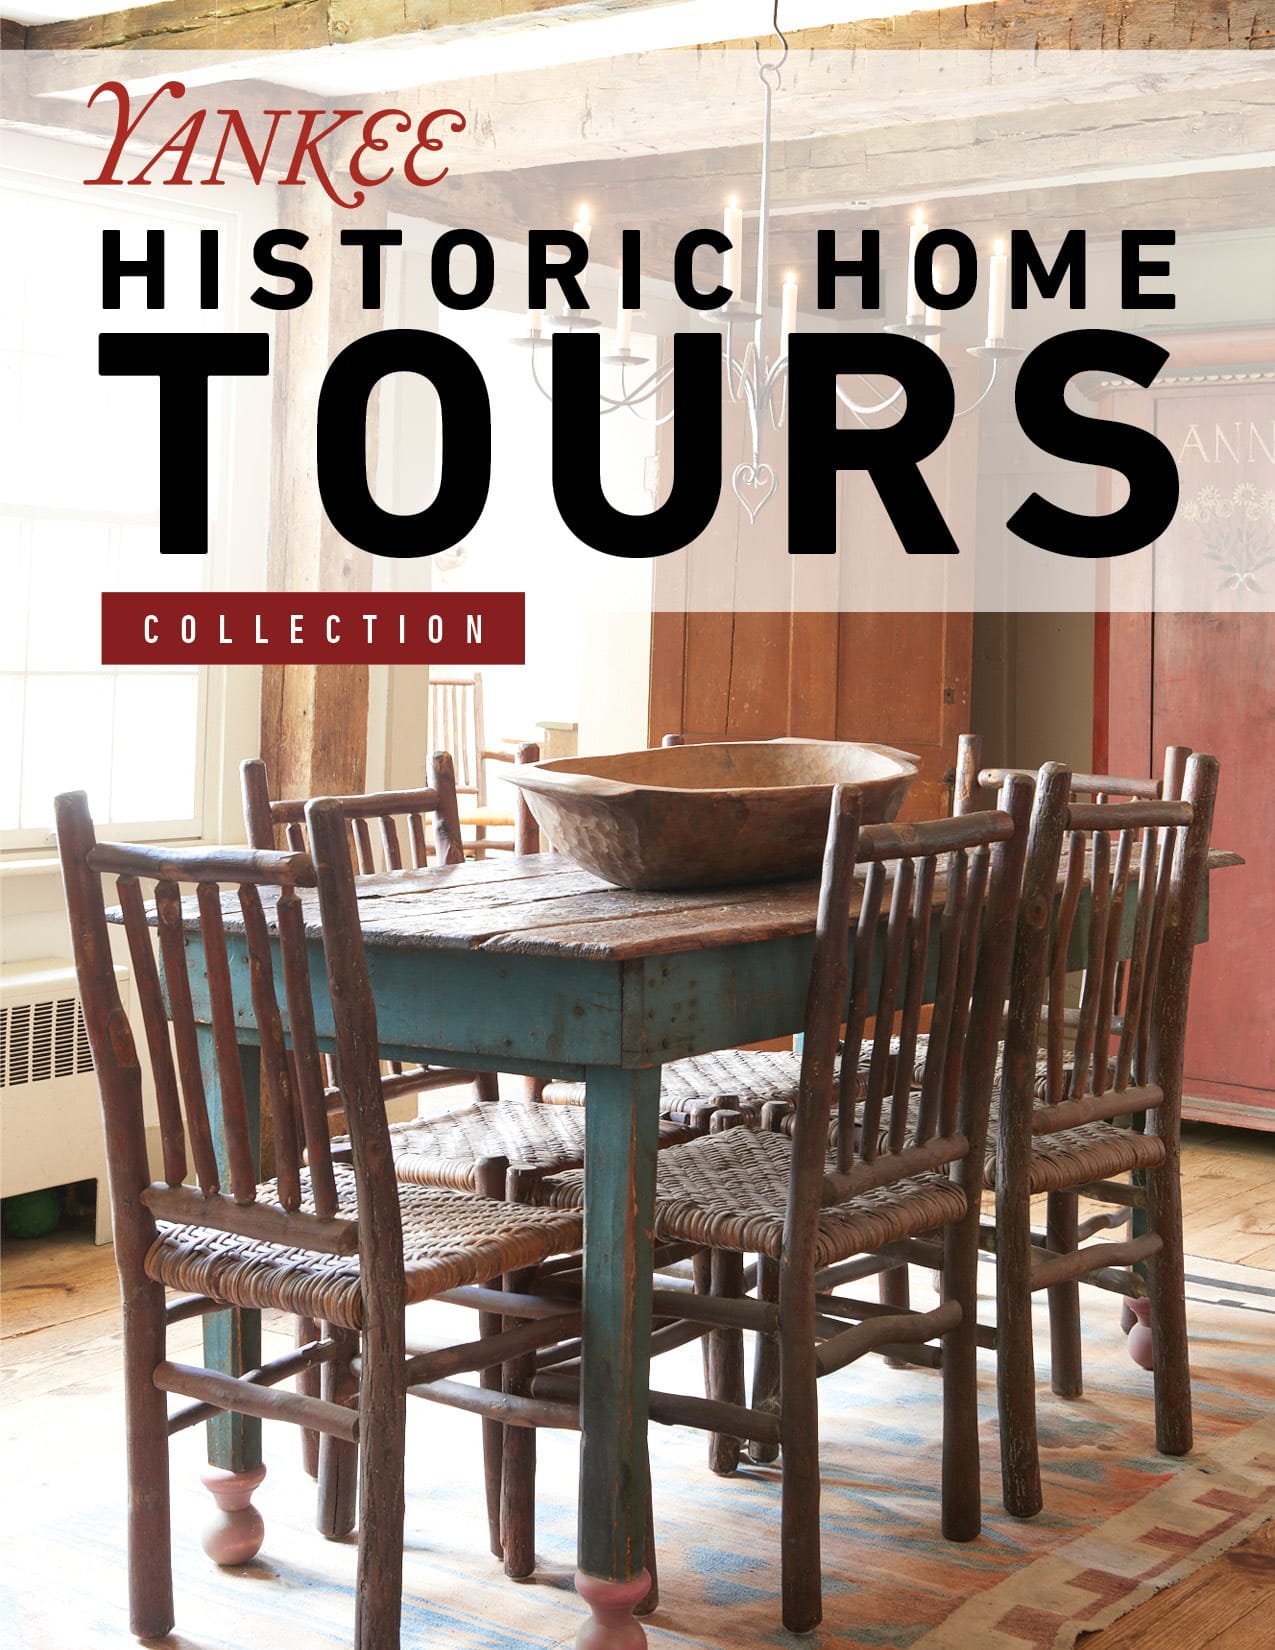 yankee-special-collection-historic-home-tours